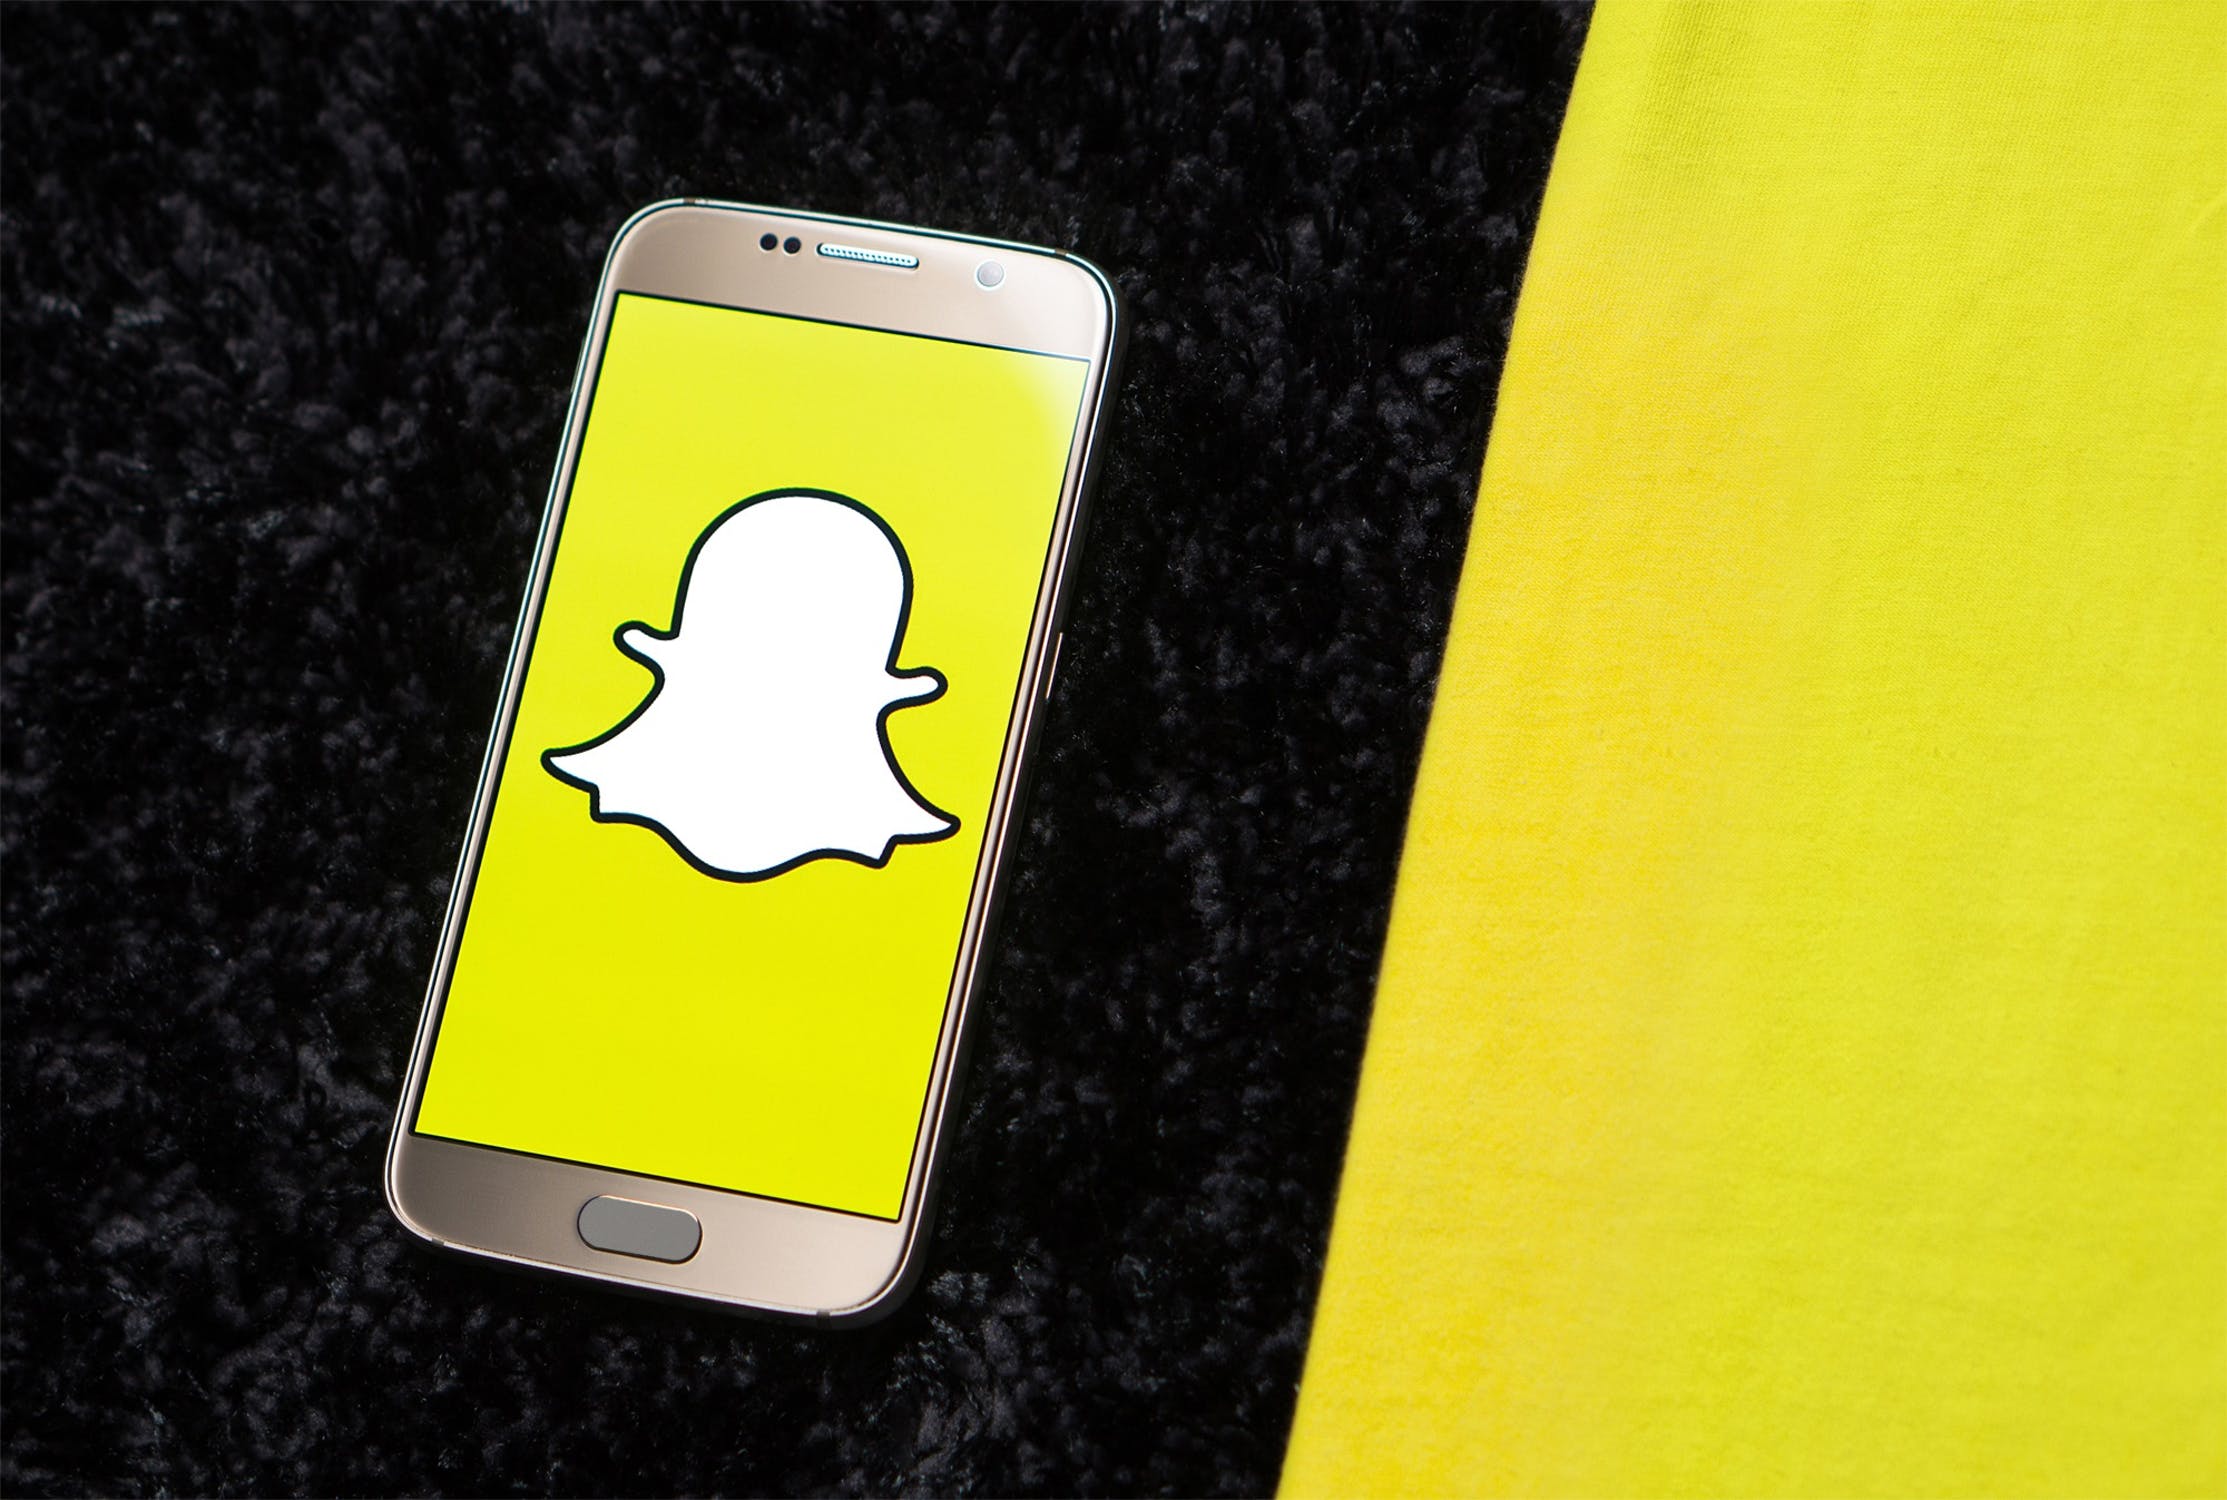 Snapchat’s New Redesign Is A Response To Angry Users—And A Loss Of Money